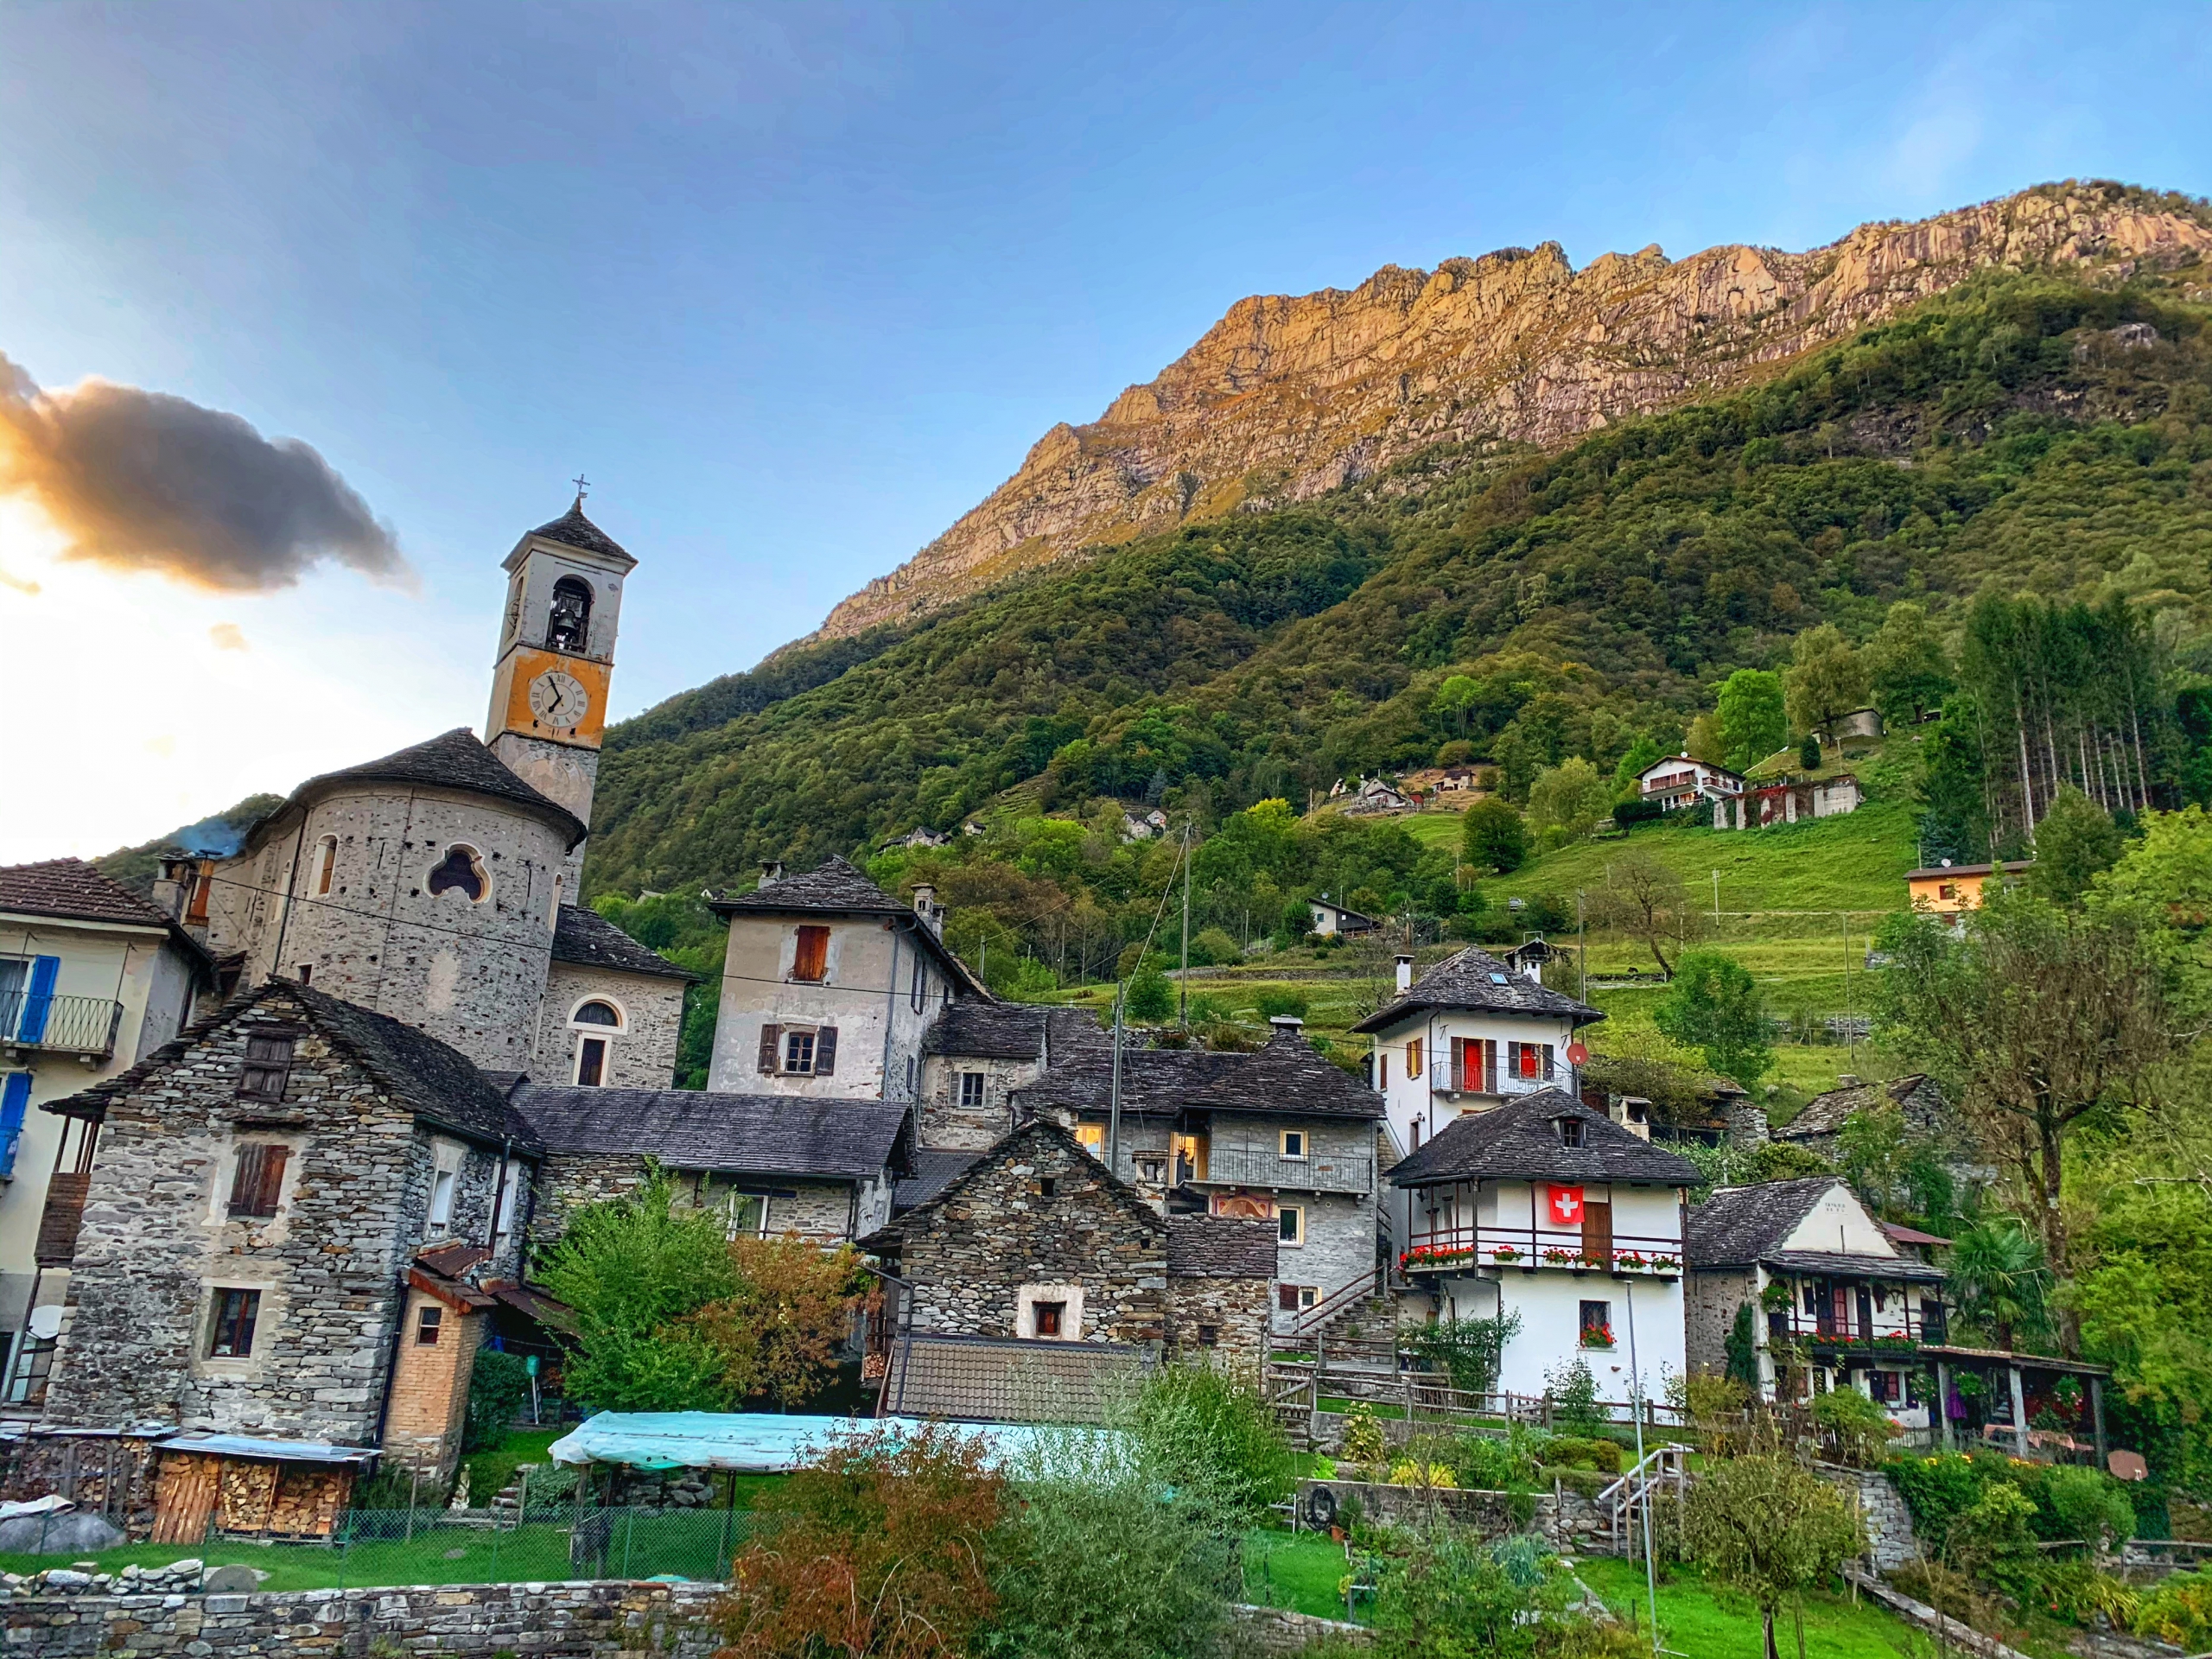 Top-Rated Attractions in the Italian part of Switzerland